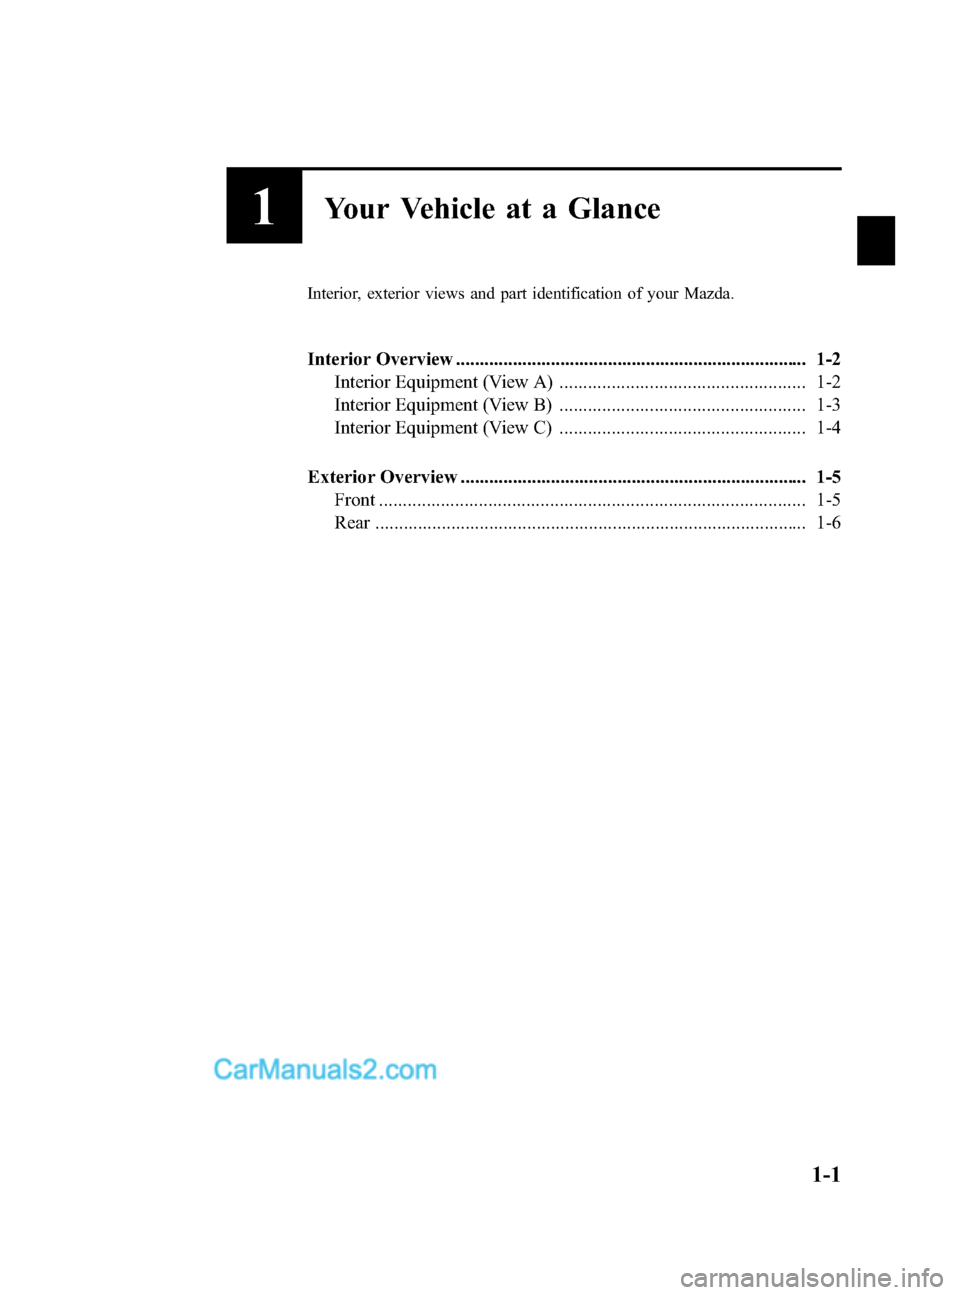 MAZDA MODEL CX-9 2014  Owners Manual (in English) Black plate (7,1)
1Your Vehicle at a Glance
Interior, exterior views and part identification of your Mazda.
Interior Overview ..........................................................................